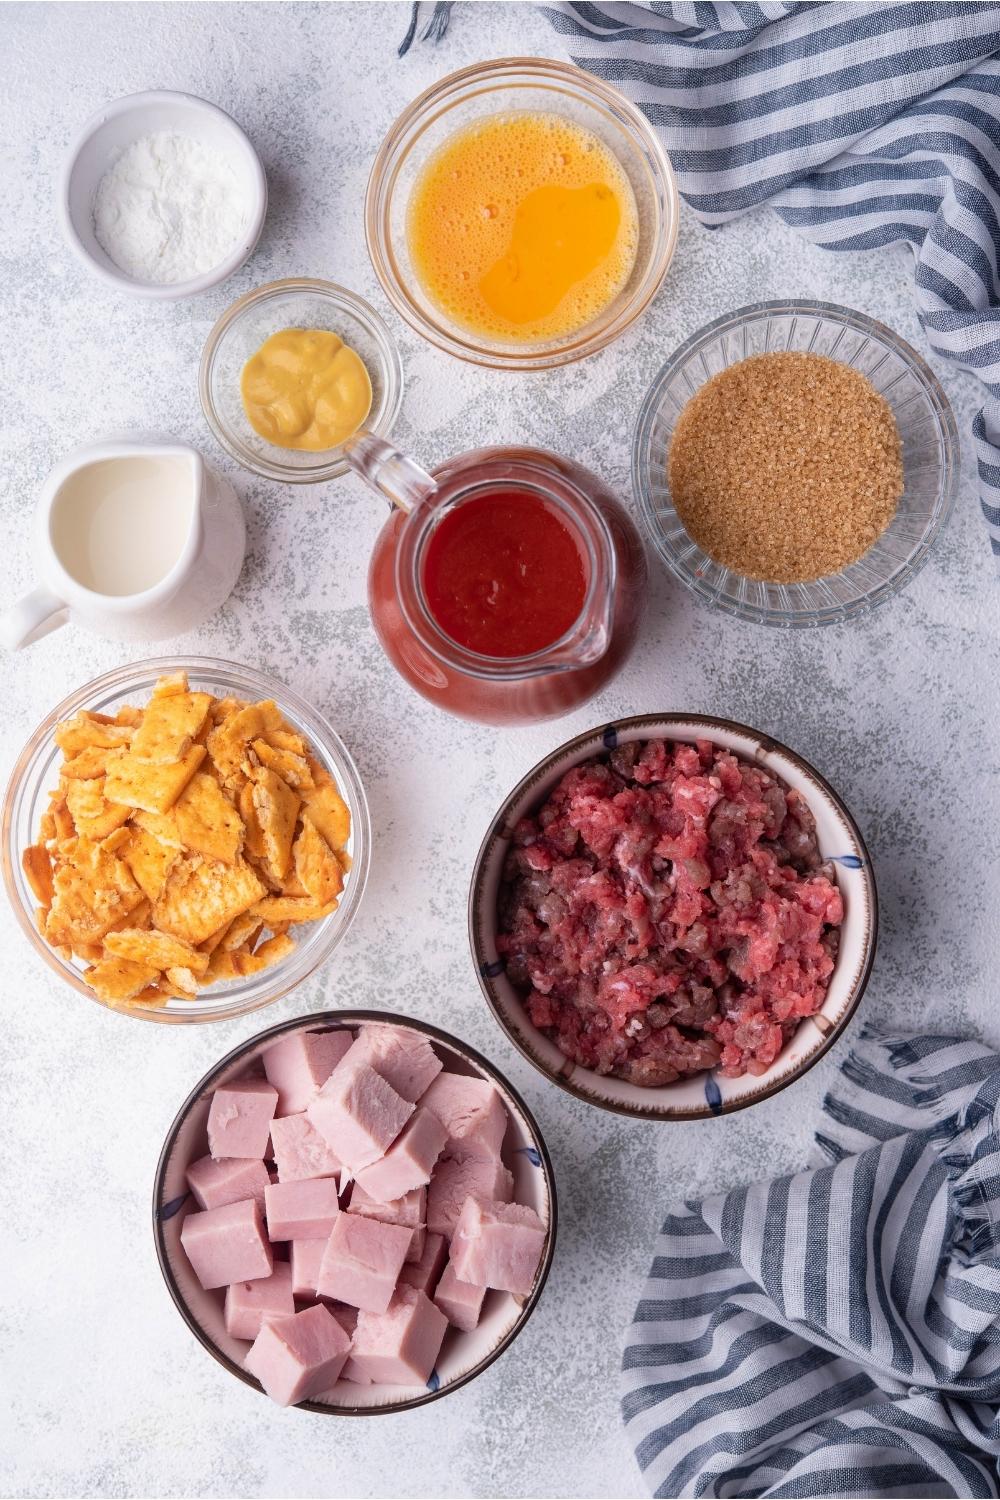 An assortment of ingredients for ham balls including bowls of tomato sauce, egg mixture, cubed ham, ground beef, saltines, and seasonings.